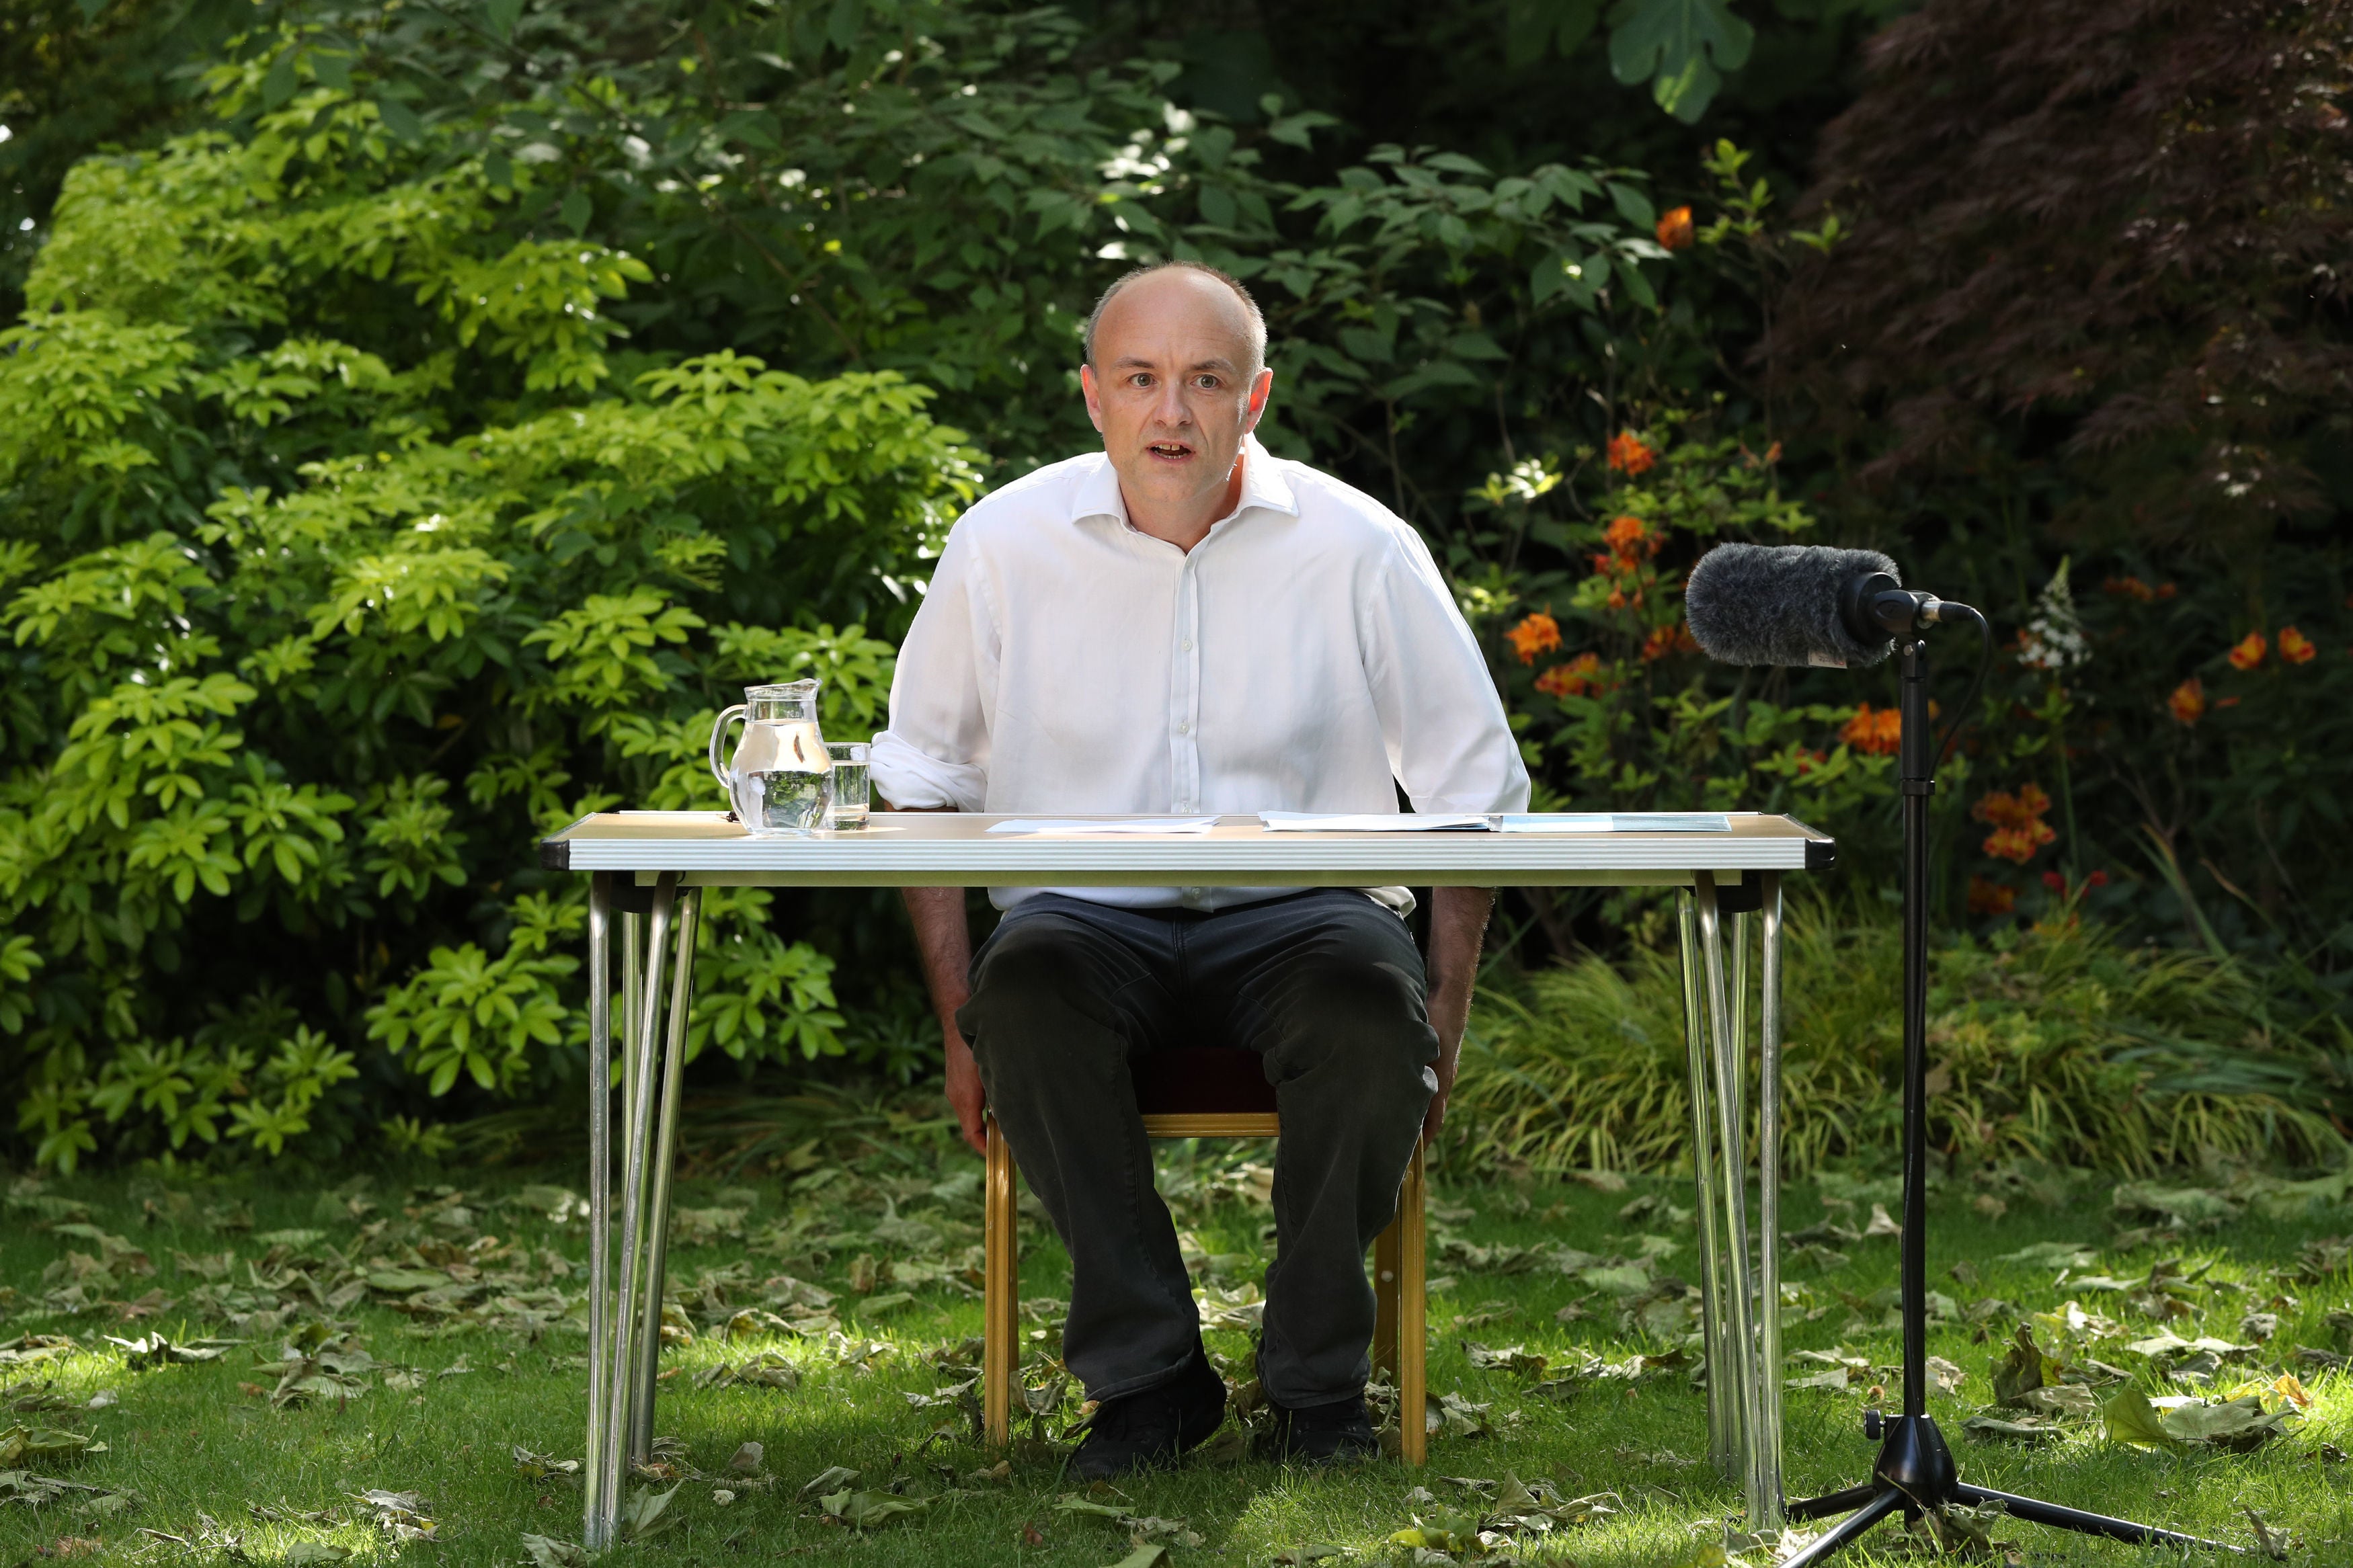 Dominic Cummings speaks from the Downing Street Rose Garden on 25 May 2020